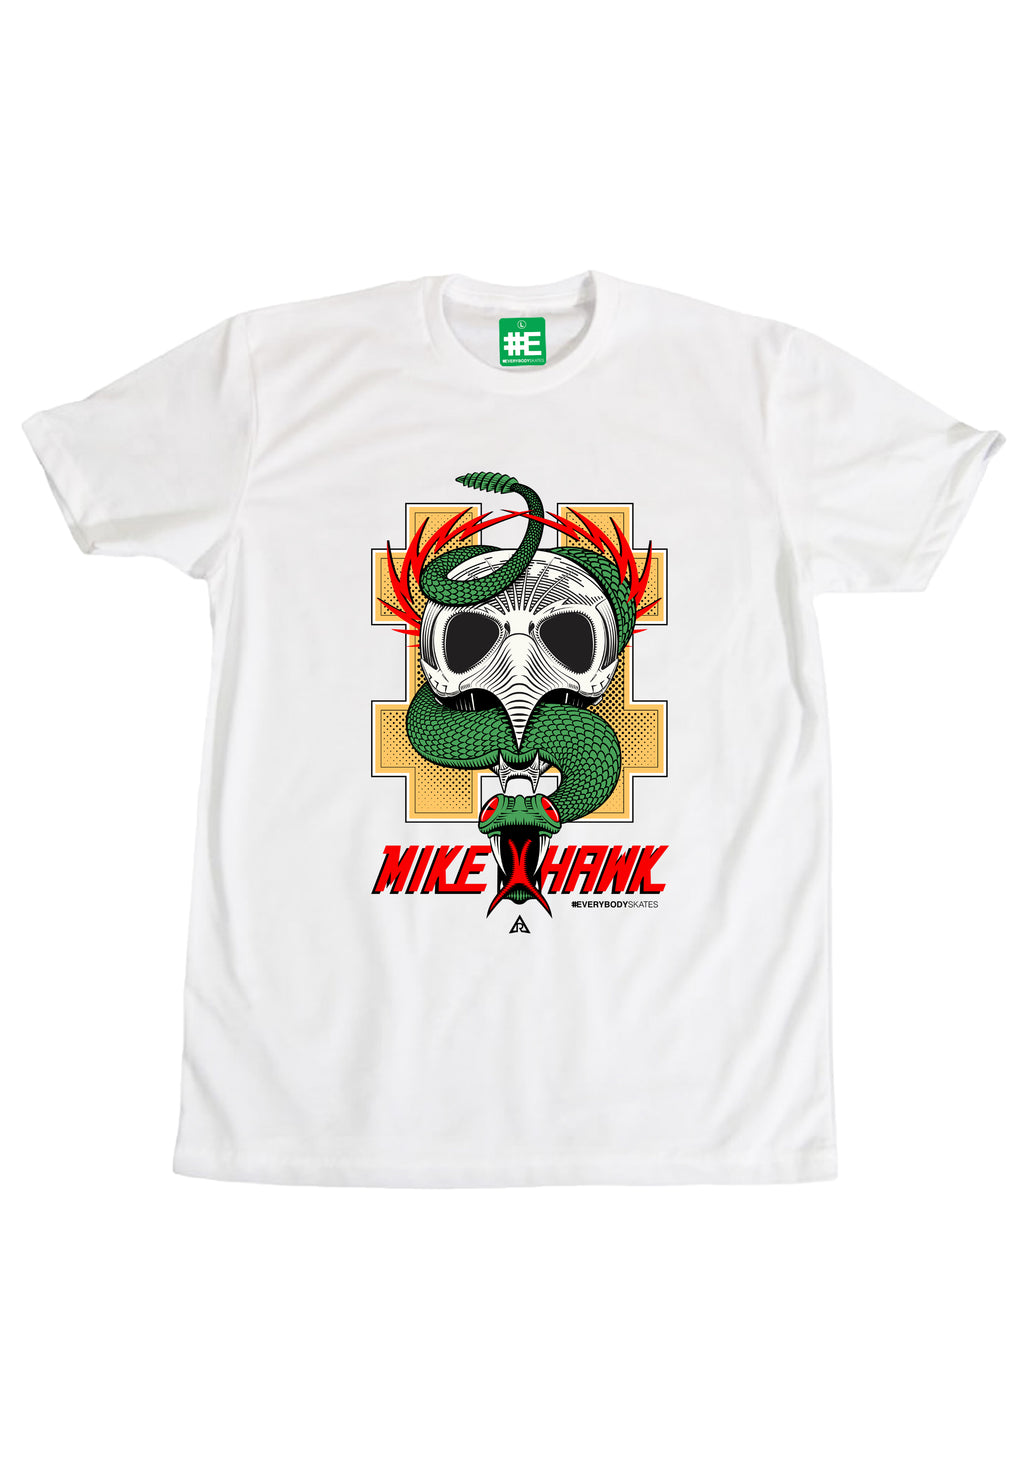 Mike Hawk Graphic T-shirt